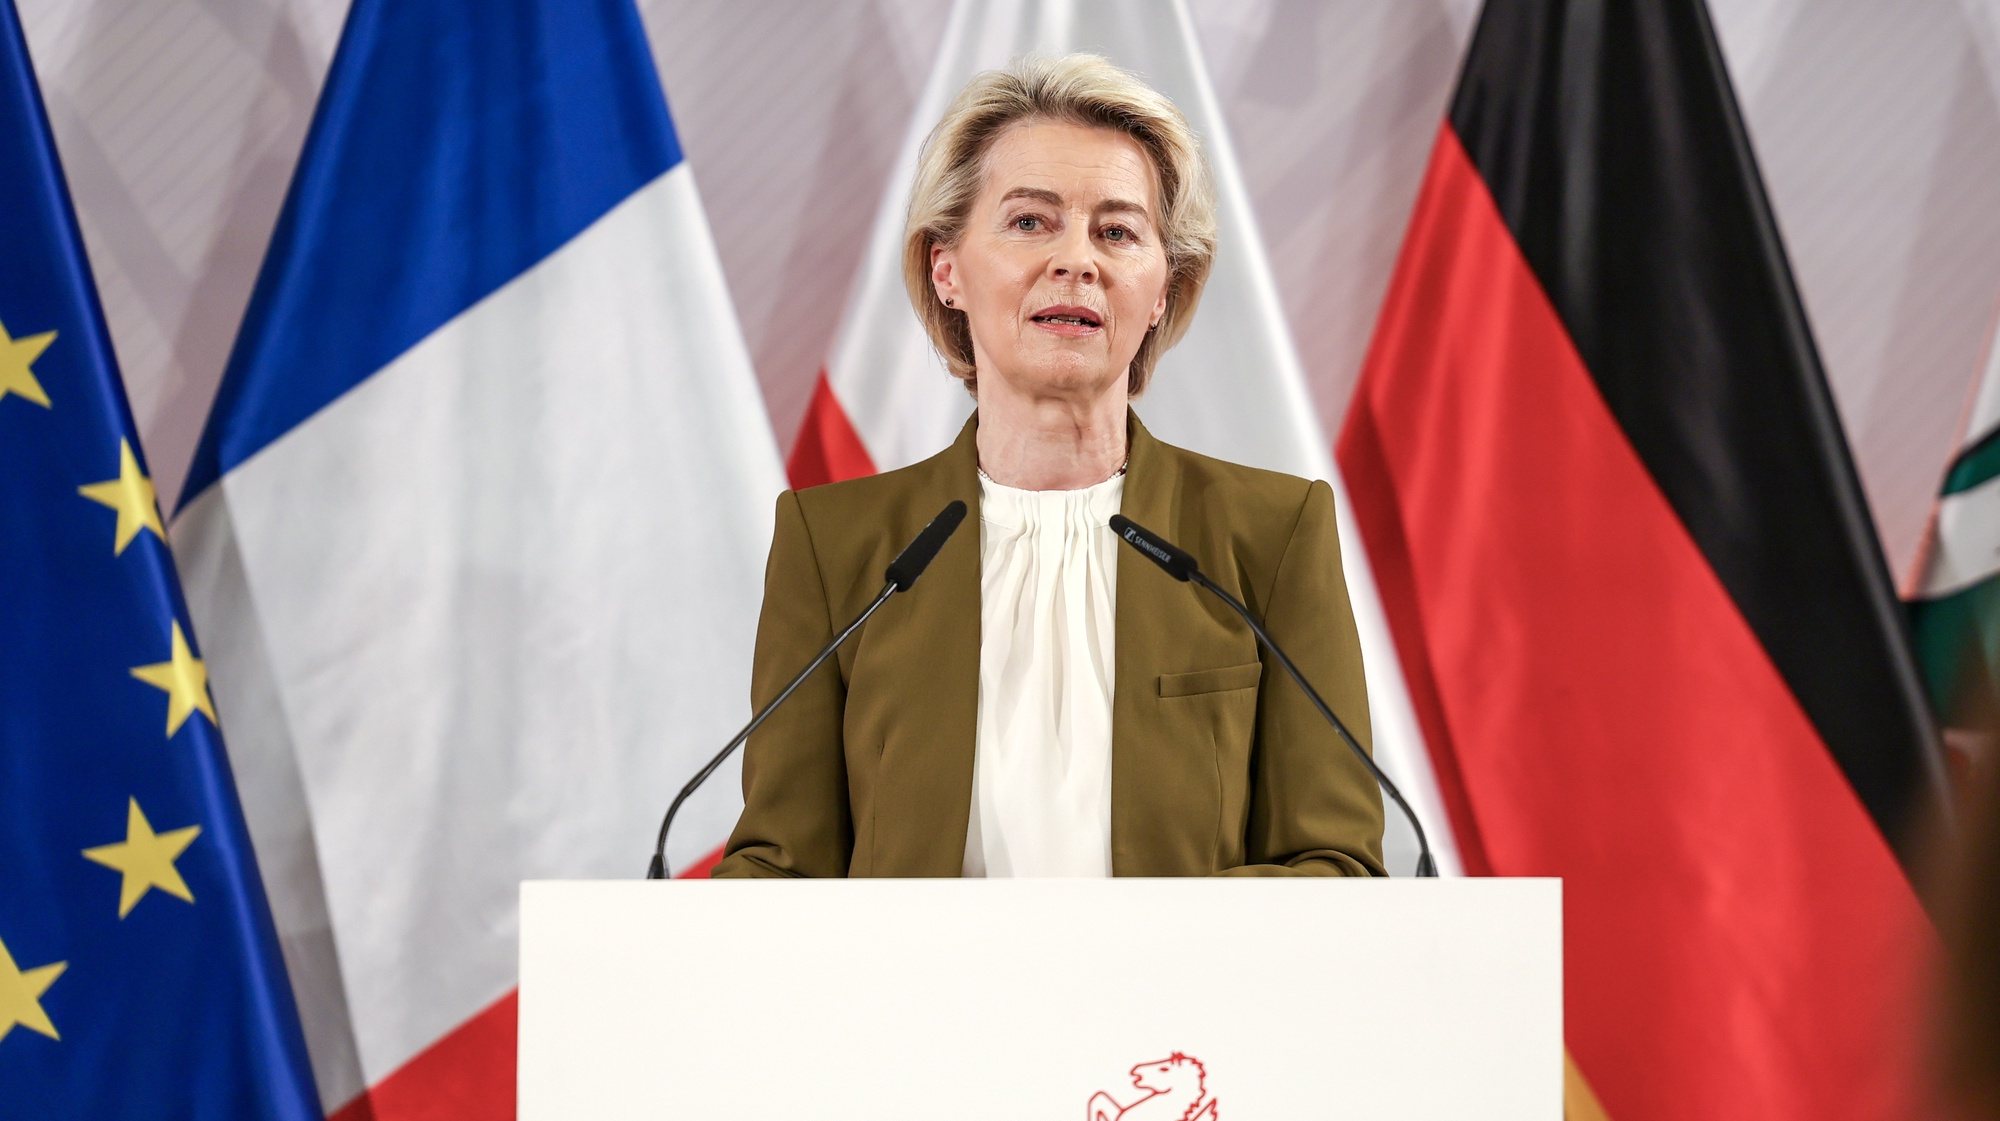 epa11374765 European Commission President Ursula von der Leyen delivers a speech during the awarding ceremony of the International Prize of the Peace of Westphalia in Muenster, Germany, 28 May 2024. Macron, who is on a visit to Germany from 26 to 28 May, will be awarded the International Peace of Westphalia Prize in Muenster on 28 May. The French President and Federal President Steinmeier will visit several regions of Germany together. It is the first state visit - the highest form of visit in diplomatic protocol - by a French president to Germany in 24 years.  EPA/CHRISTOPHER NEUNDORF / POOL